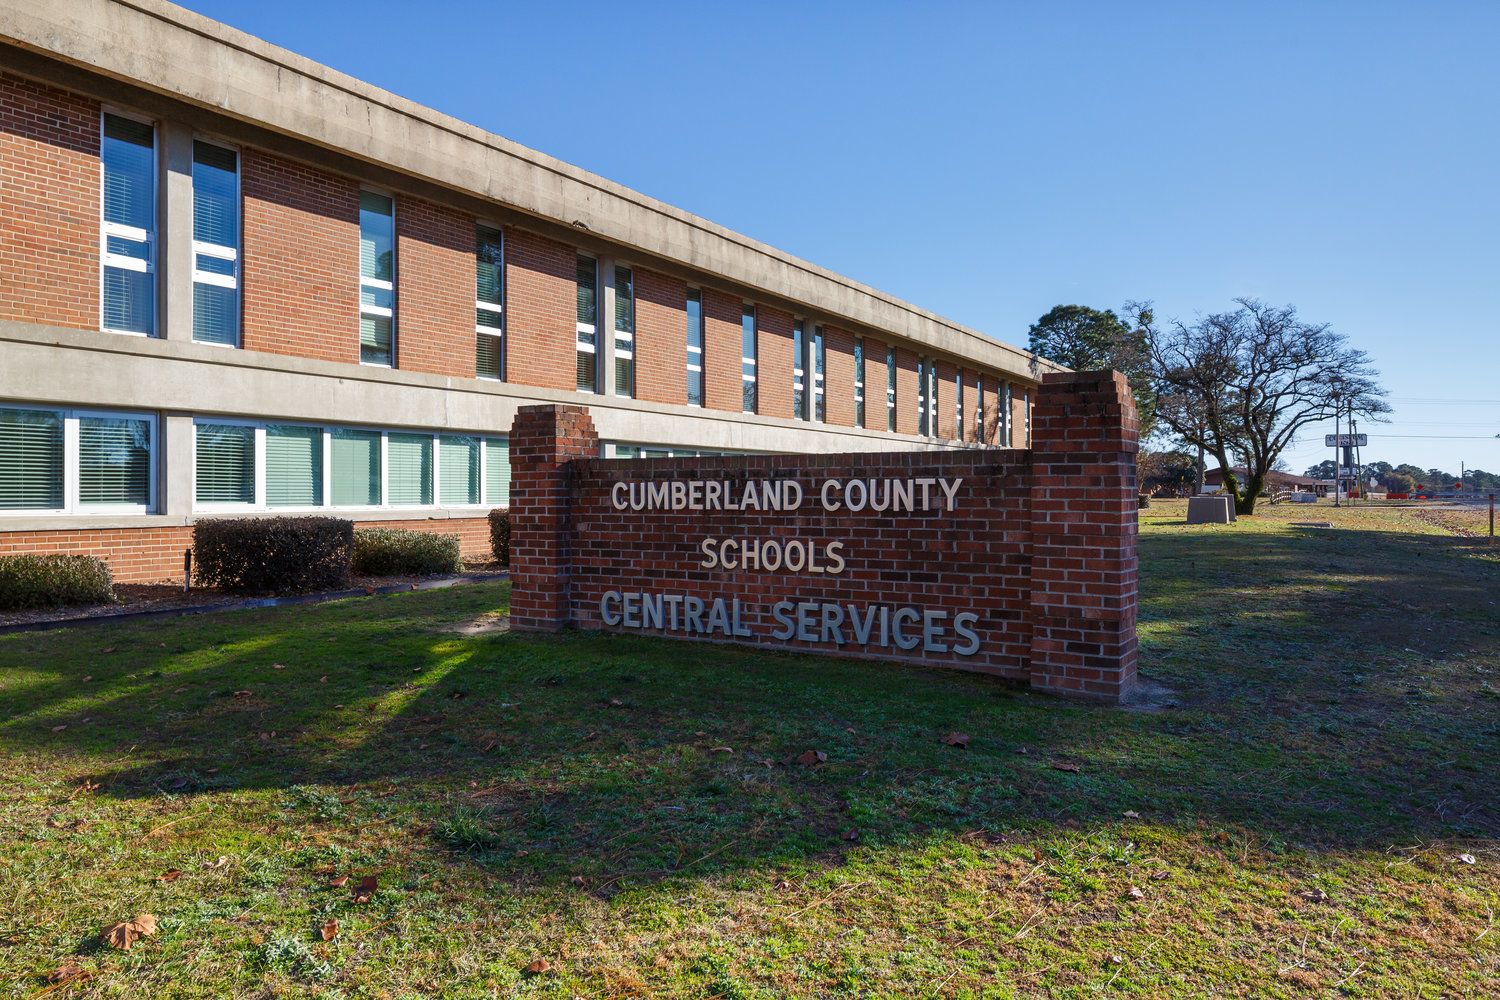 Cumberland County Schools will purchase a "community engagement" bus using federal COVID relief funding